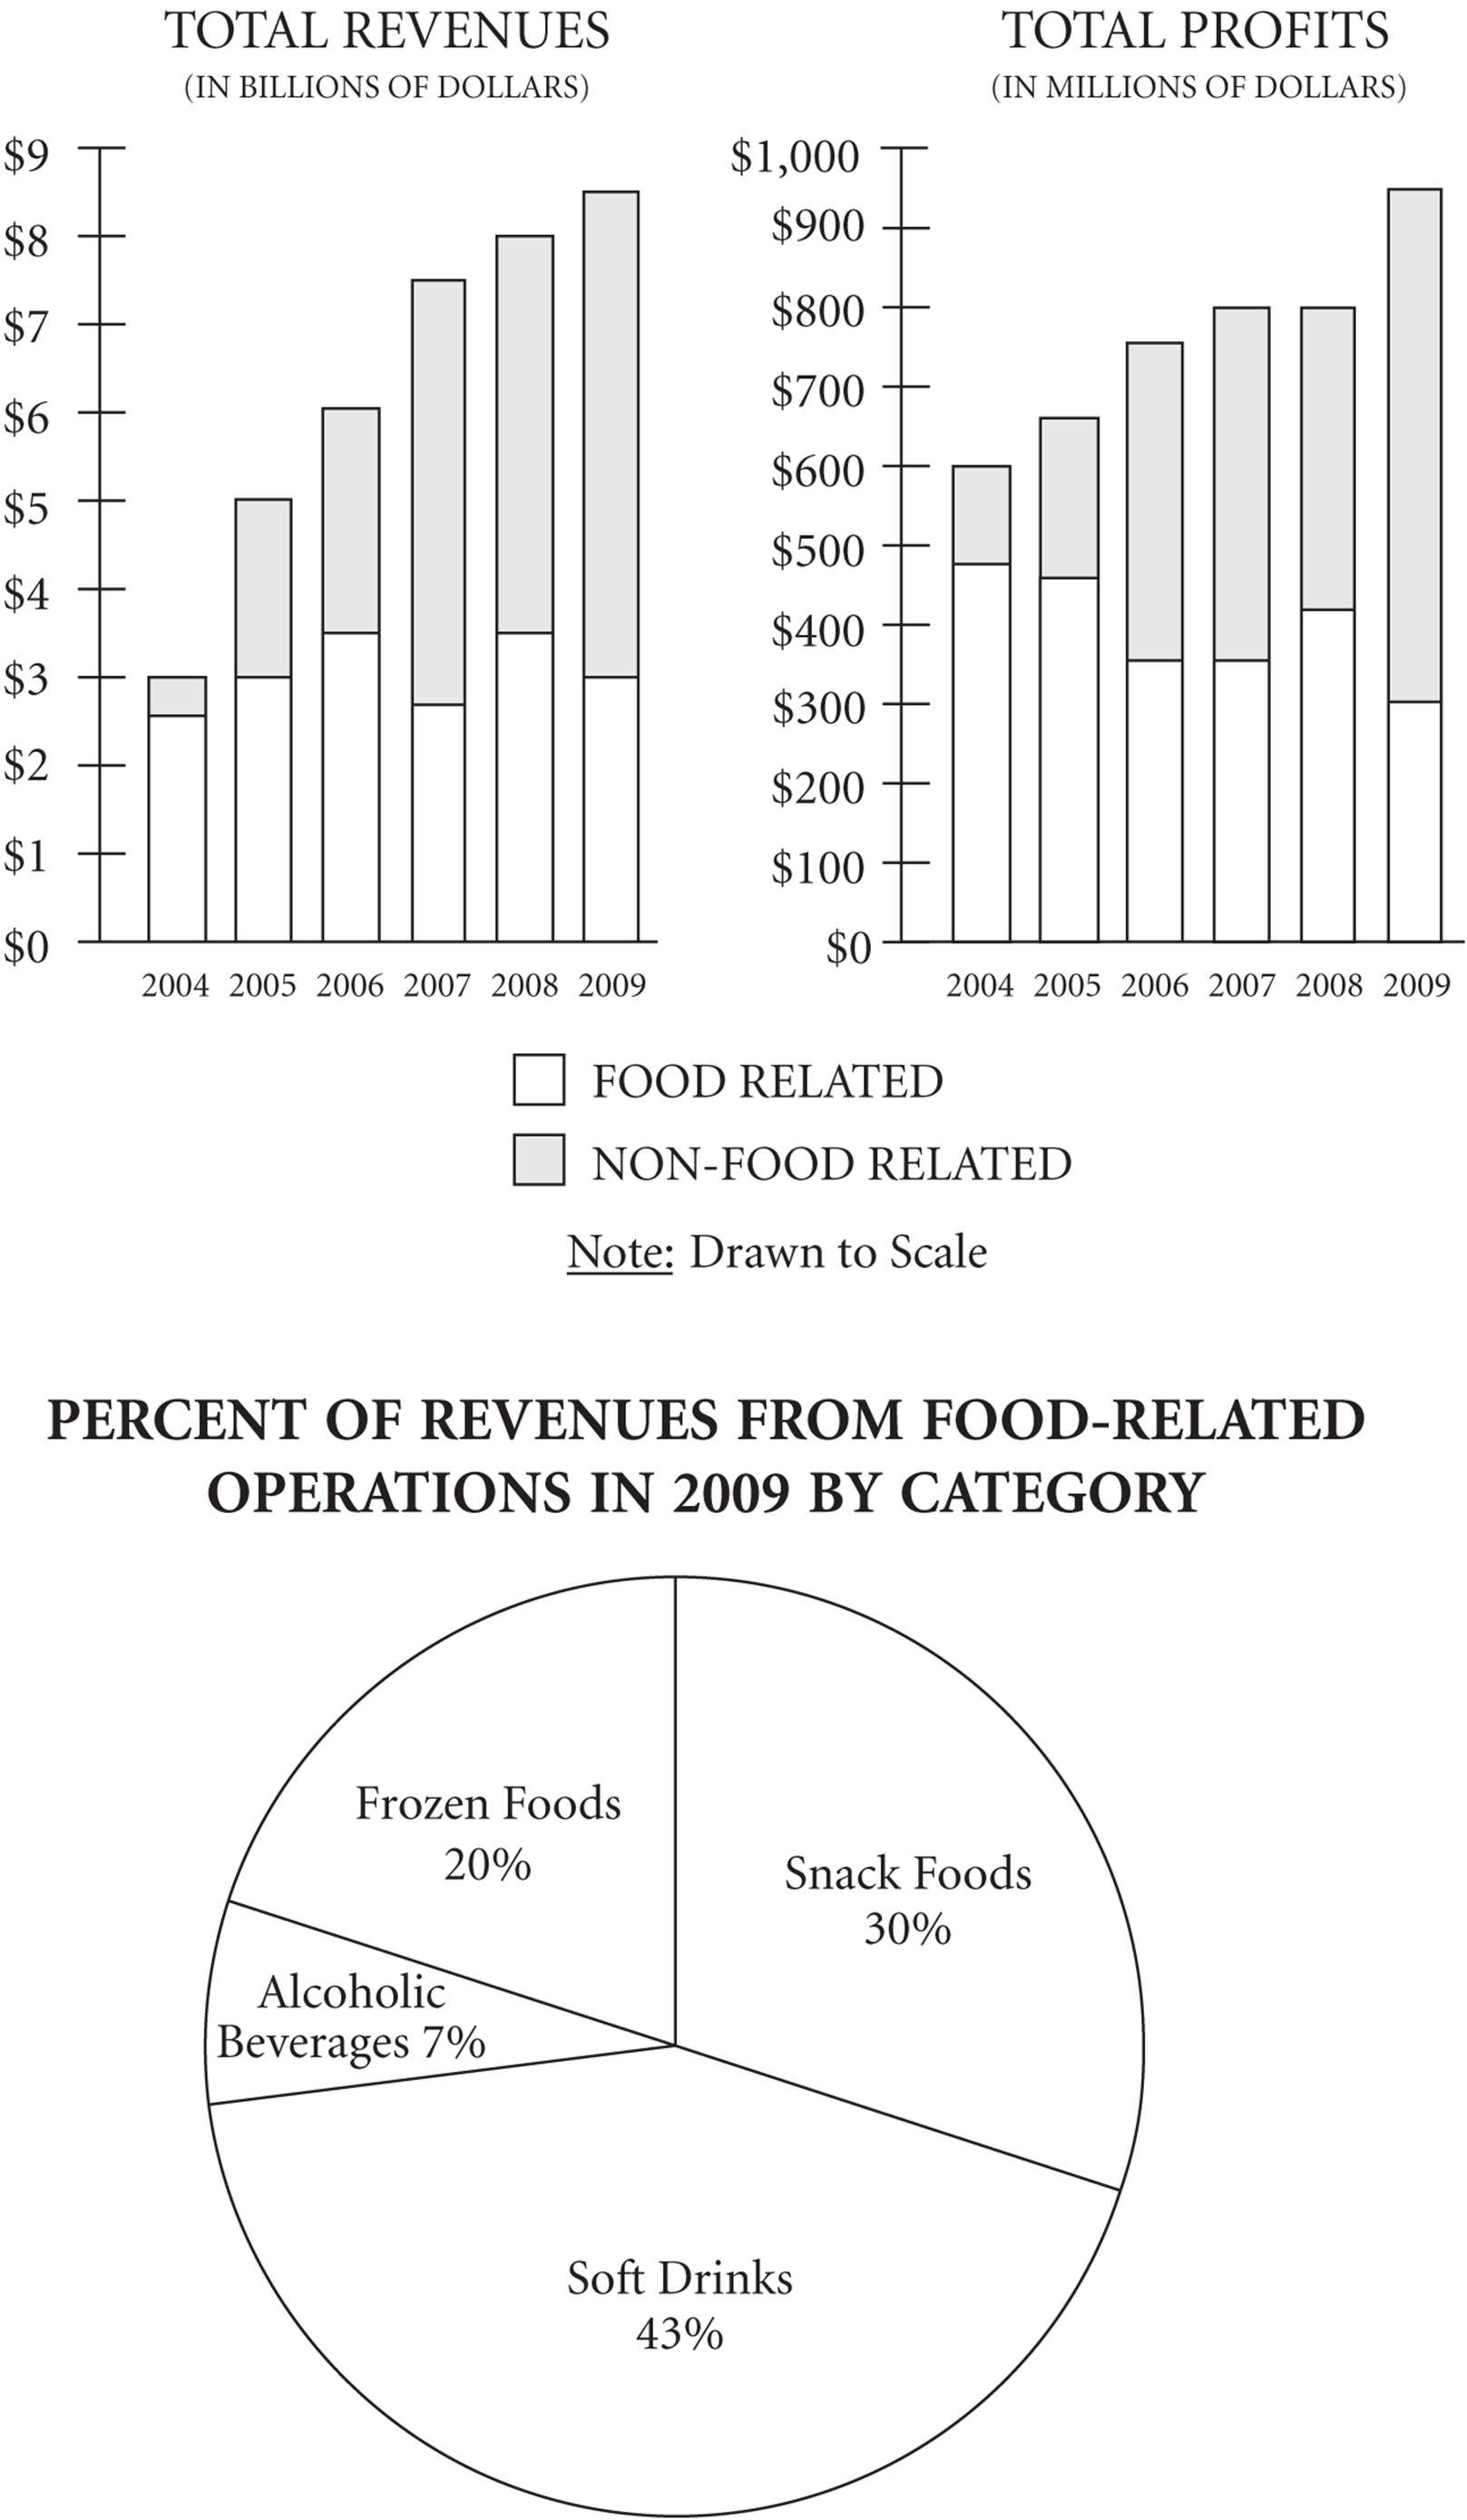 Bar graphs of total revenues, on the left, and total profits, on the right. The total revenue graph has points from $0 to $9 billion on the vertical axis and years from 2004 to 2009 on the horizontal axis. The unshaded bars represent food related revenue, which is between $2B and $3B in 2004 and 2007, $3B in 2005 and 2009, and between $3B and $4B in 2006 and 2008. The shaded bars represent non-food related revenue, which is less than $1B in 2004, $2B in 2005, between $2B and $3B in 2006, between $4B and $5B in 2007 and 2008, and between $5B and $6B in 2009. The total profit graph has points from $0 to $1,000 million on the vertical axis and years from 2004 to 2009 on the horizontal axis. The unshaded bars represent food related profit, which is between $400M and $500M in 2004, 2005, and 2008; between $300M and $400M in 2006 and 2007; and $300M for 2009. The shaded bars represent non-food related profit, which is more than $100M in 2004 and 2005, between $300M and $400M in 2006 and 2008, more than $400M in 2007; and between $600M and $700M in 2009. Below the graph is a pie chart of percent of revenues from food-related operations in 2009 by category: 30% from snack foods, 43% from soft drinks, 7% from alcoholic beverages, and 20% from frozen foods.